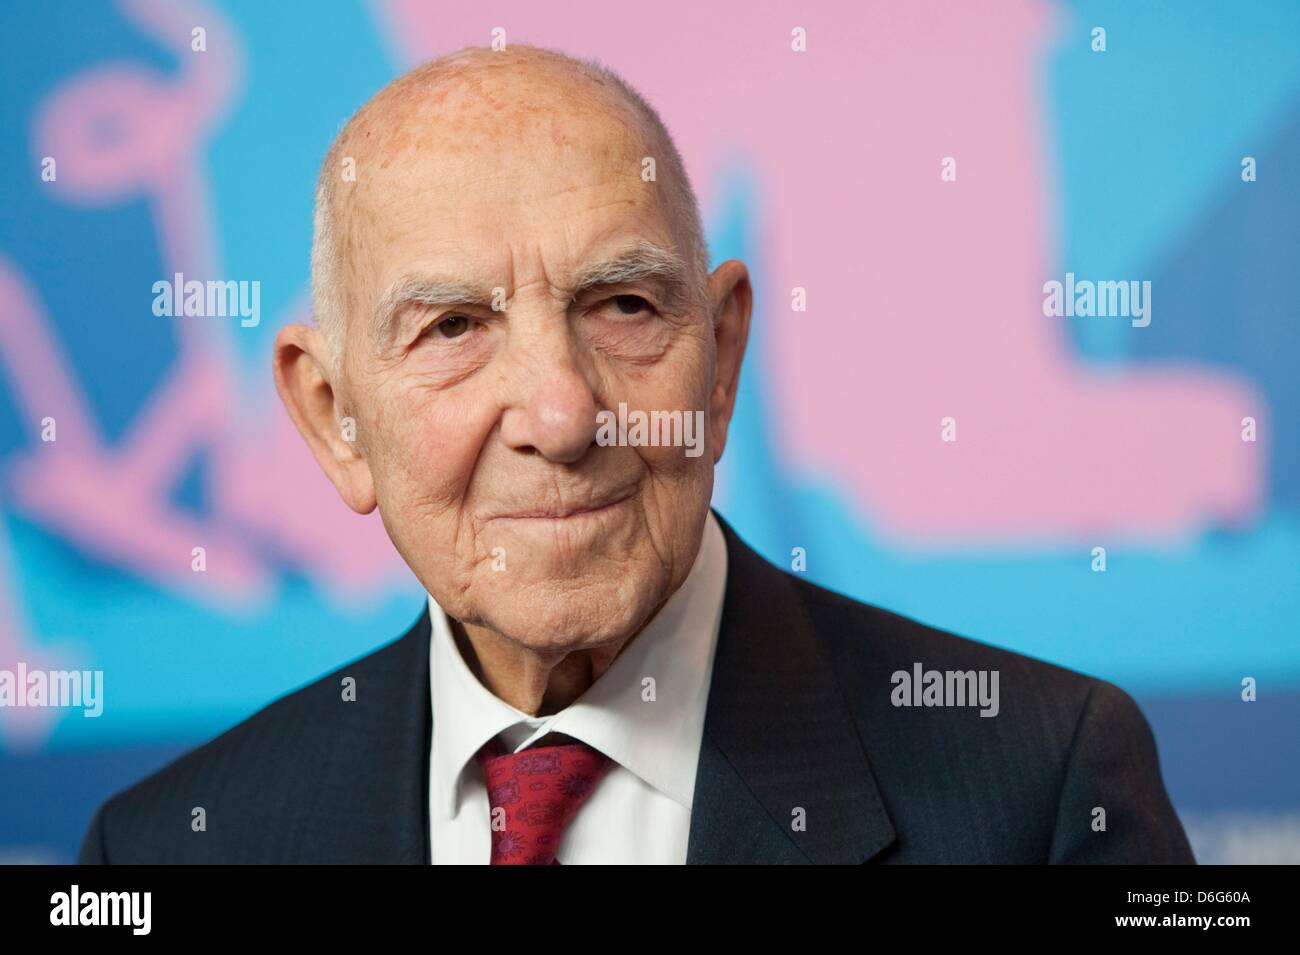 French author Stephane Hessel attends the press conference for the movie 'Indignados' during the 62nd Berlin International Film Festival, in Berlin, Germany, 10 February 2012. The movie is presented in the section Panorama Special at the 62nd Berlinale running from 09 to 19 February. Photo: Sebastian Kahnert dpa Stock Photo